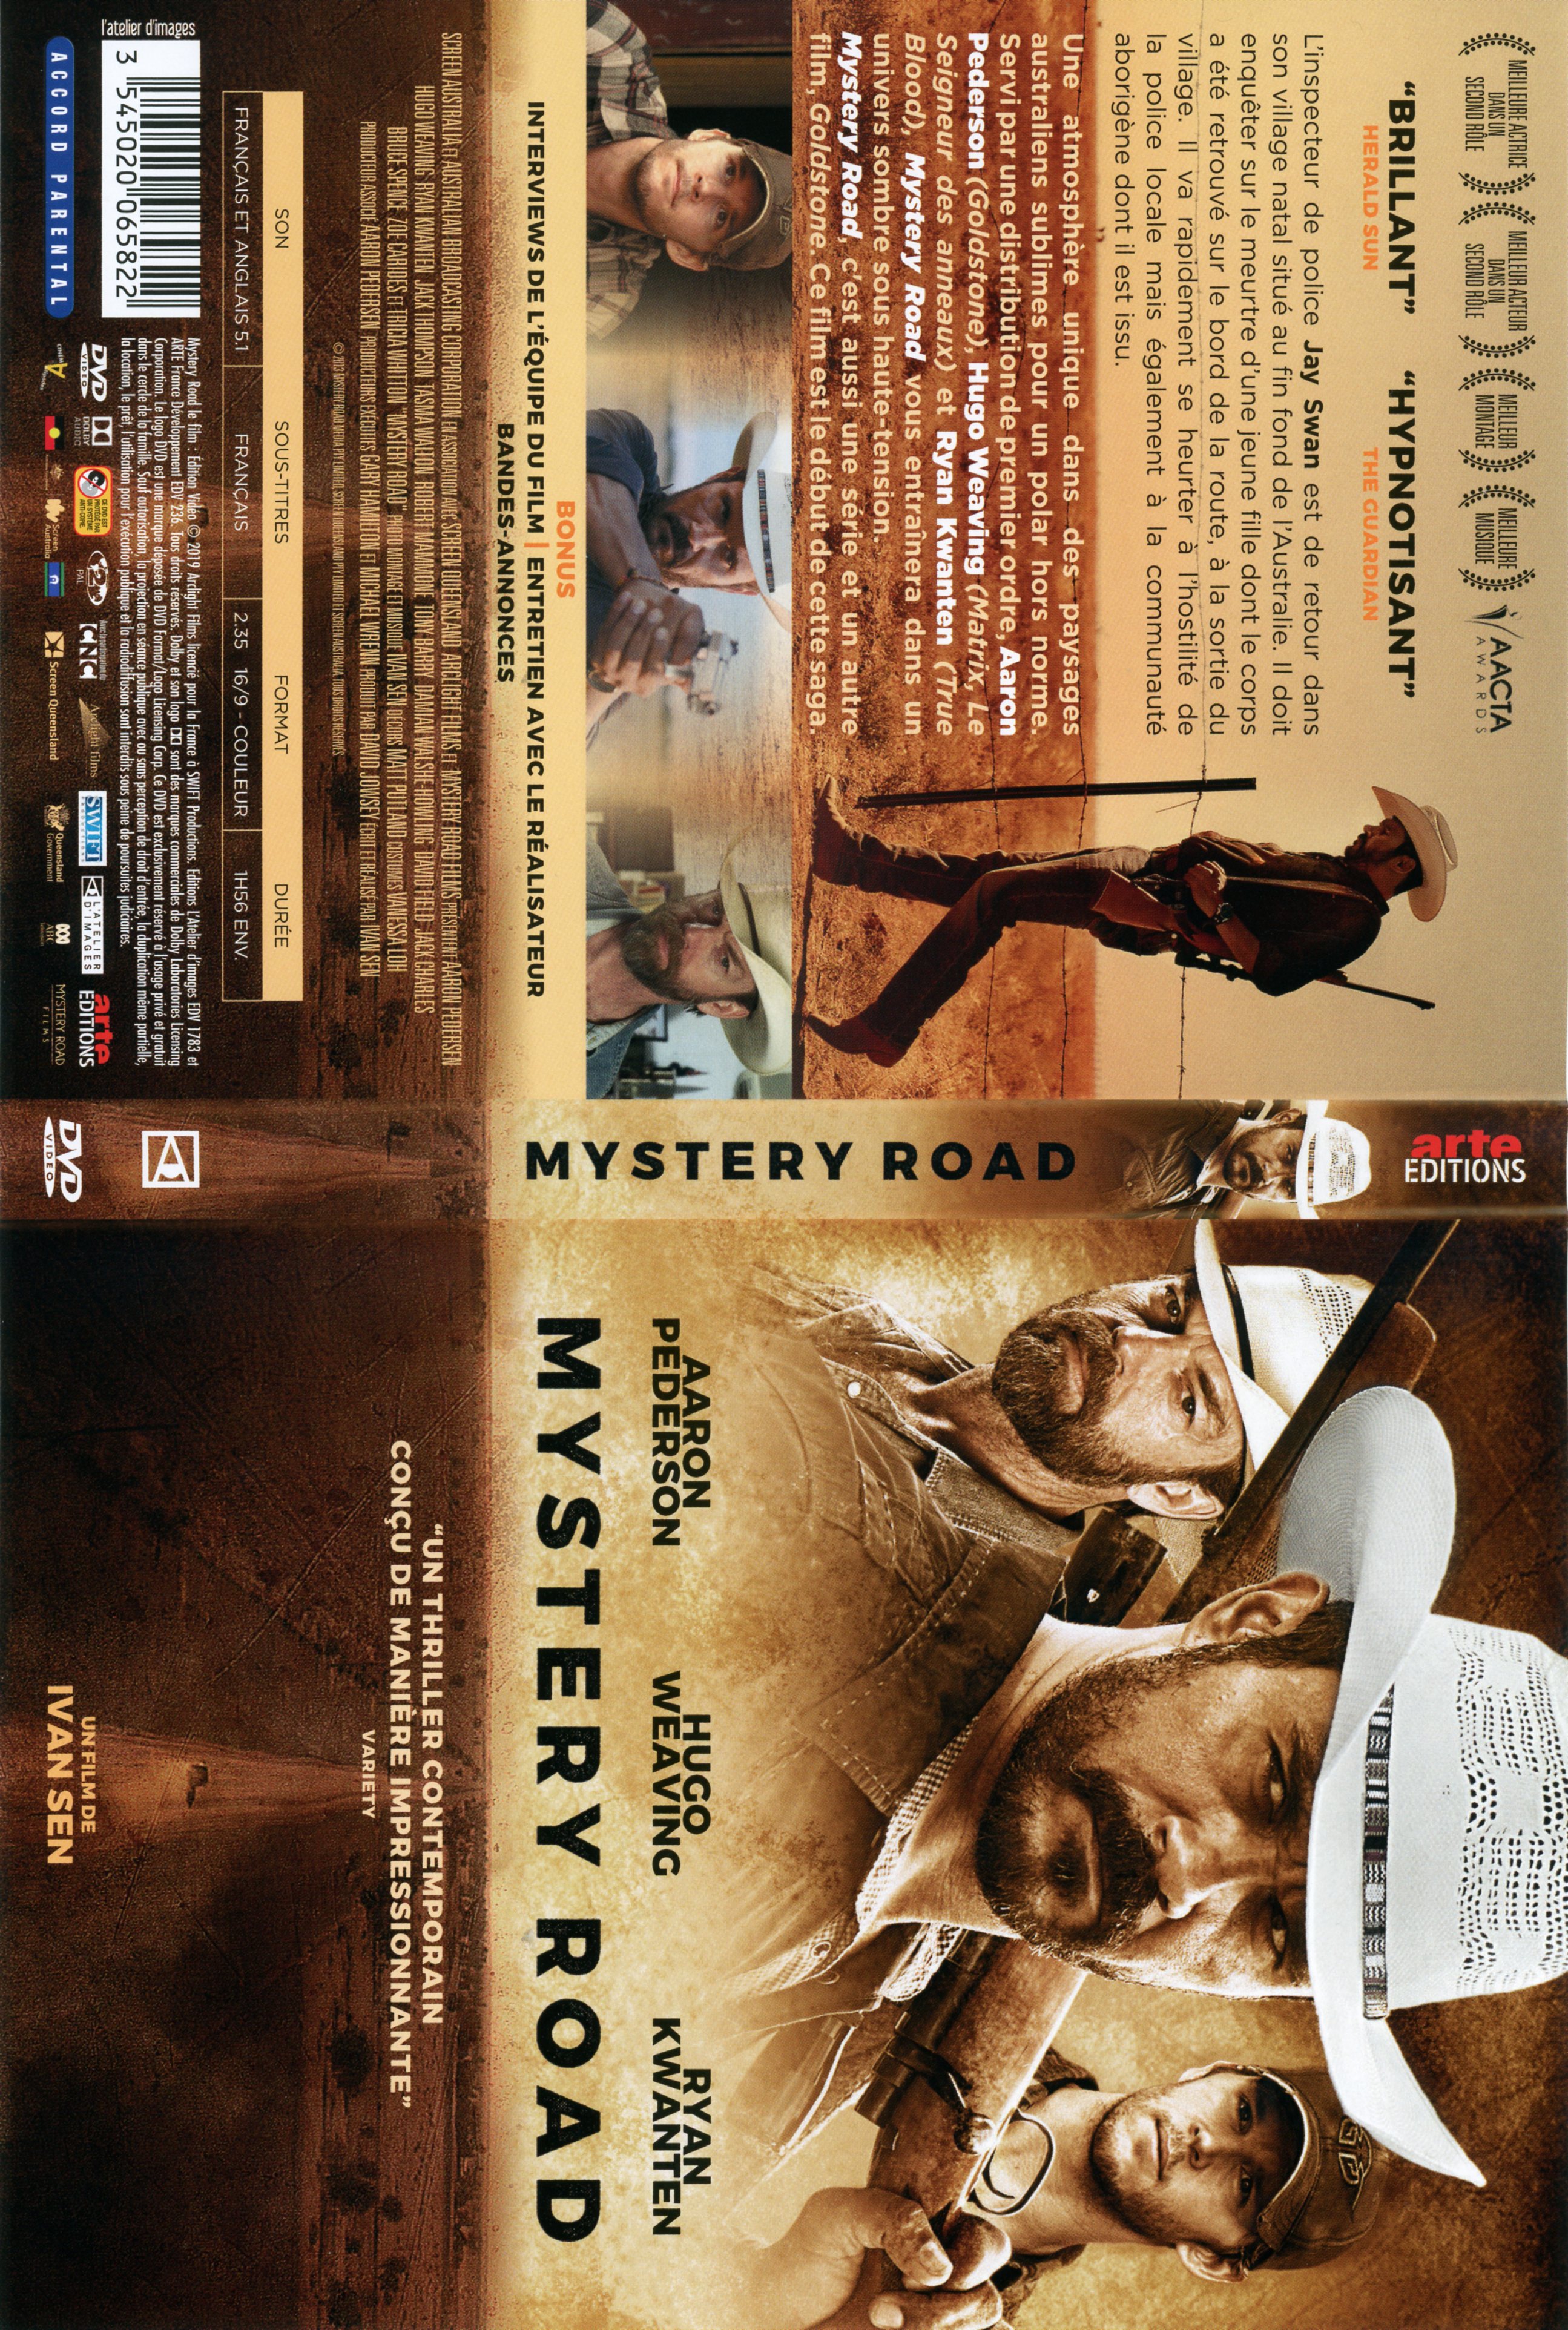 Jaquette DVD Mystery road